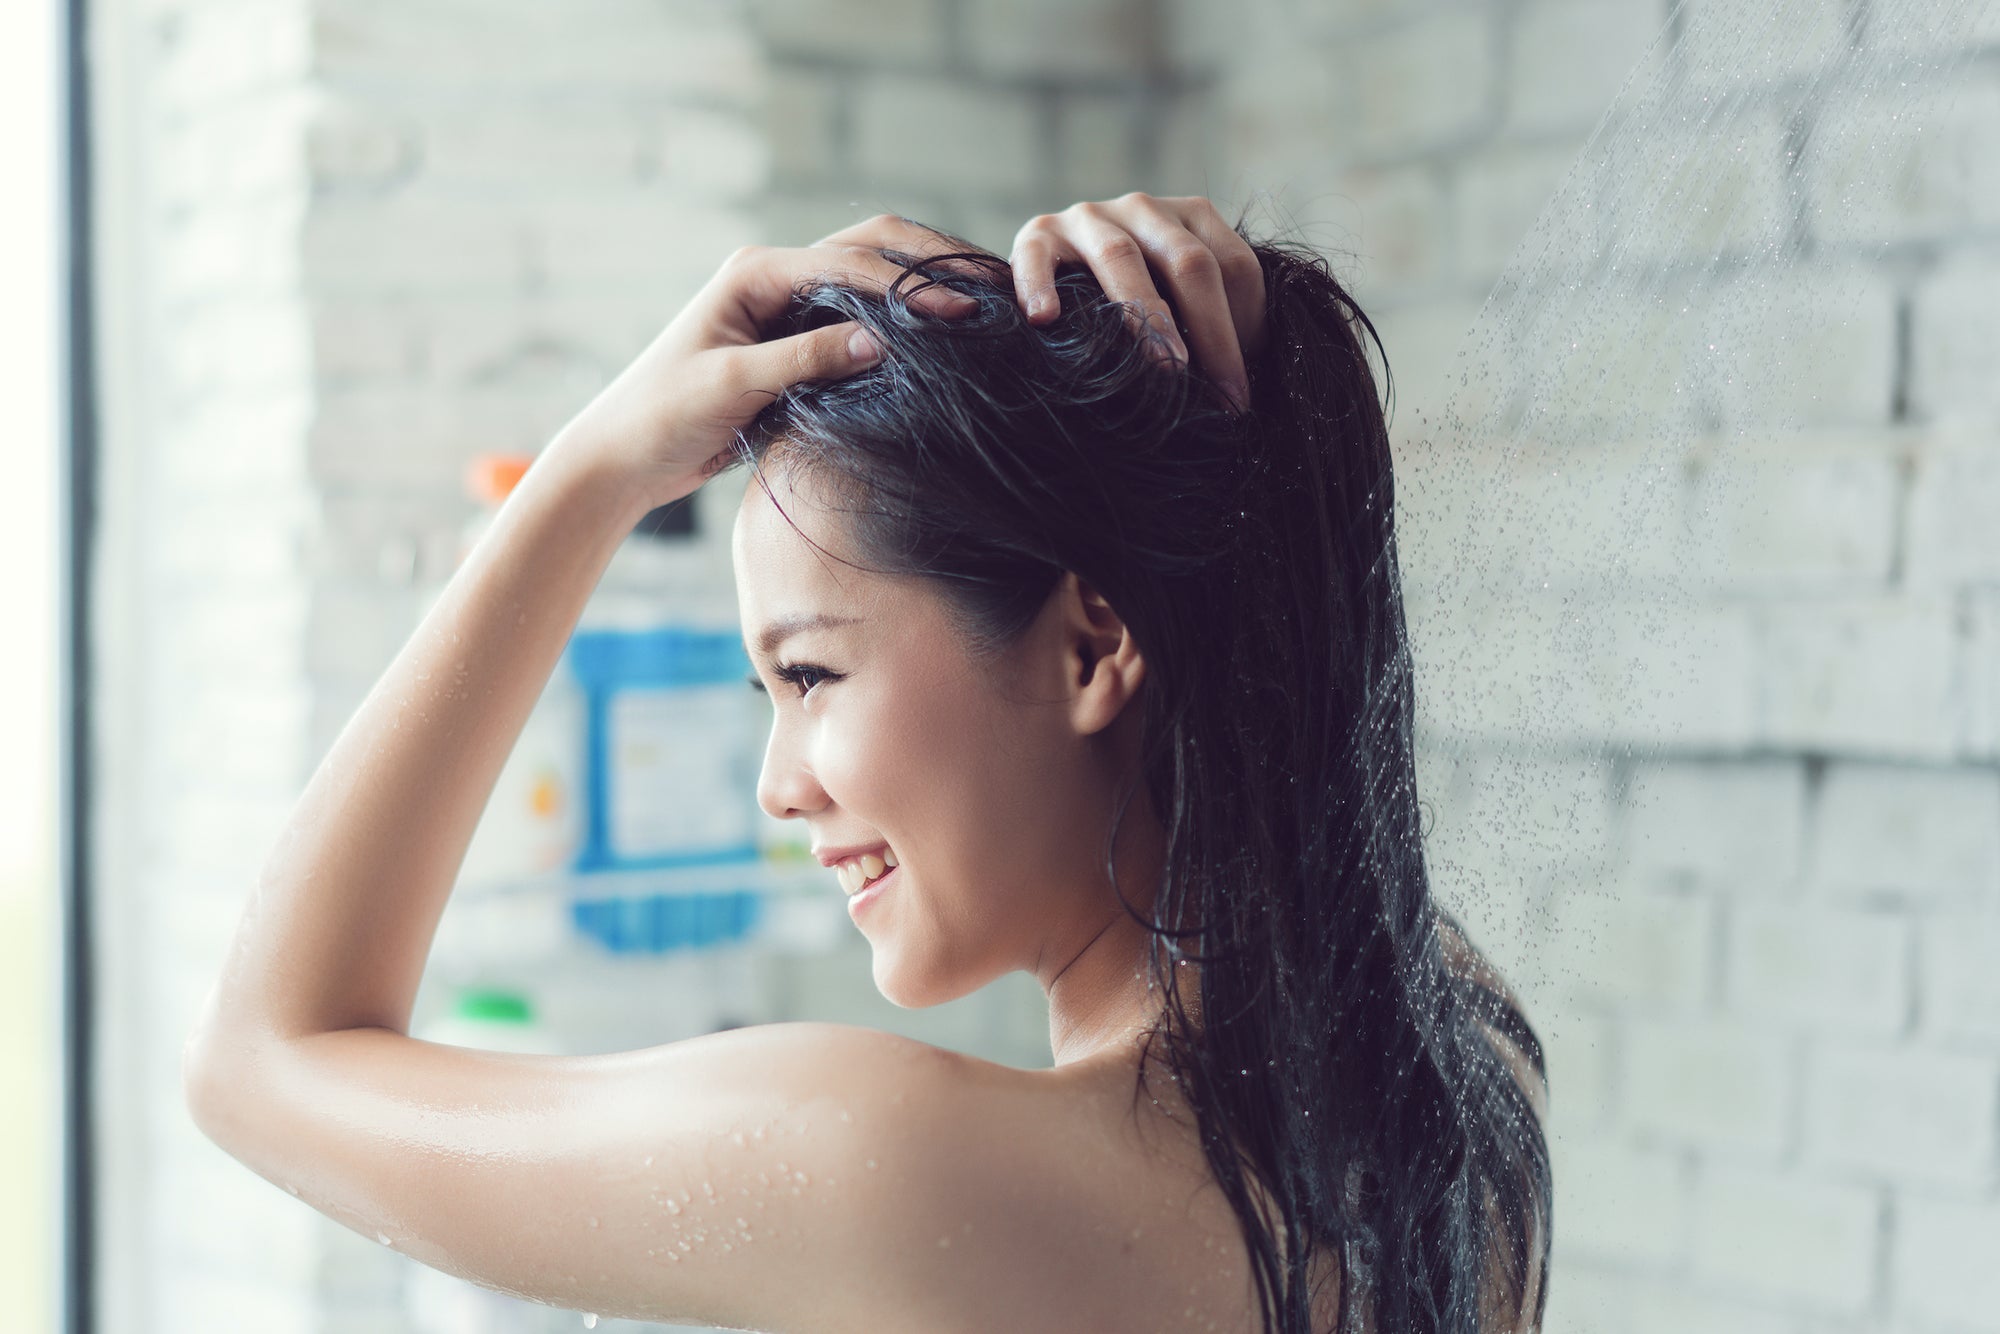 Woman with long dark hair smiling and doing a scalp treatment in the shower